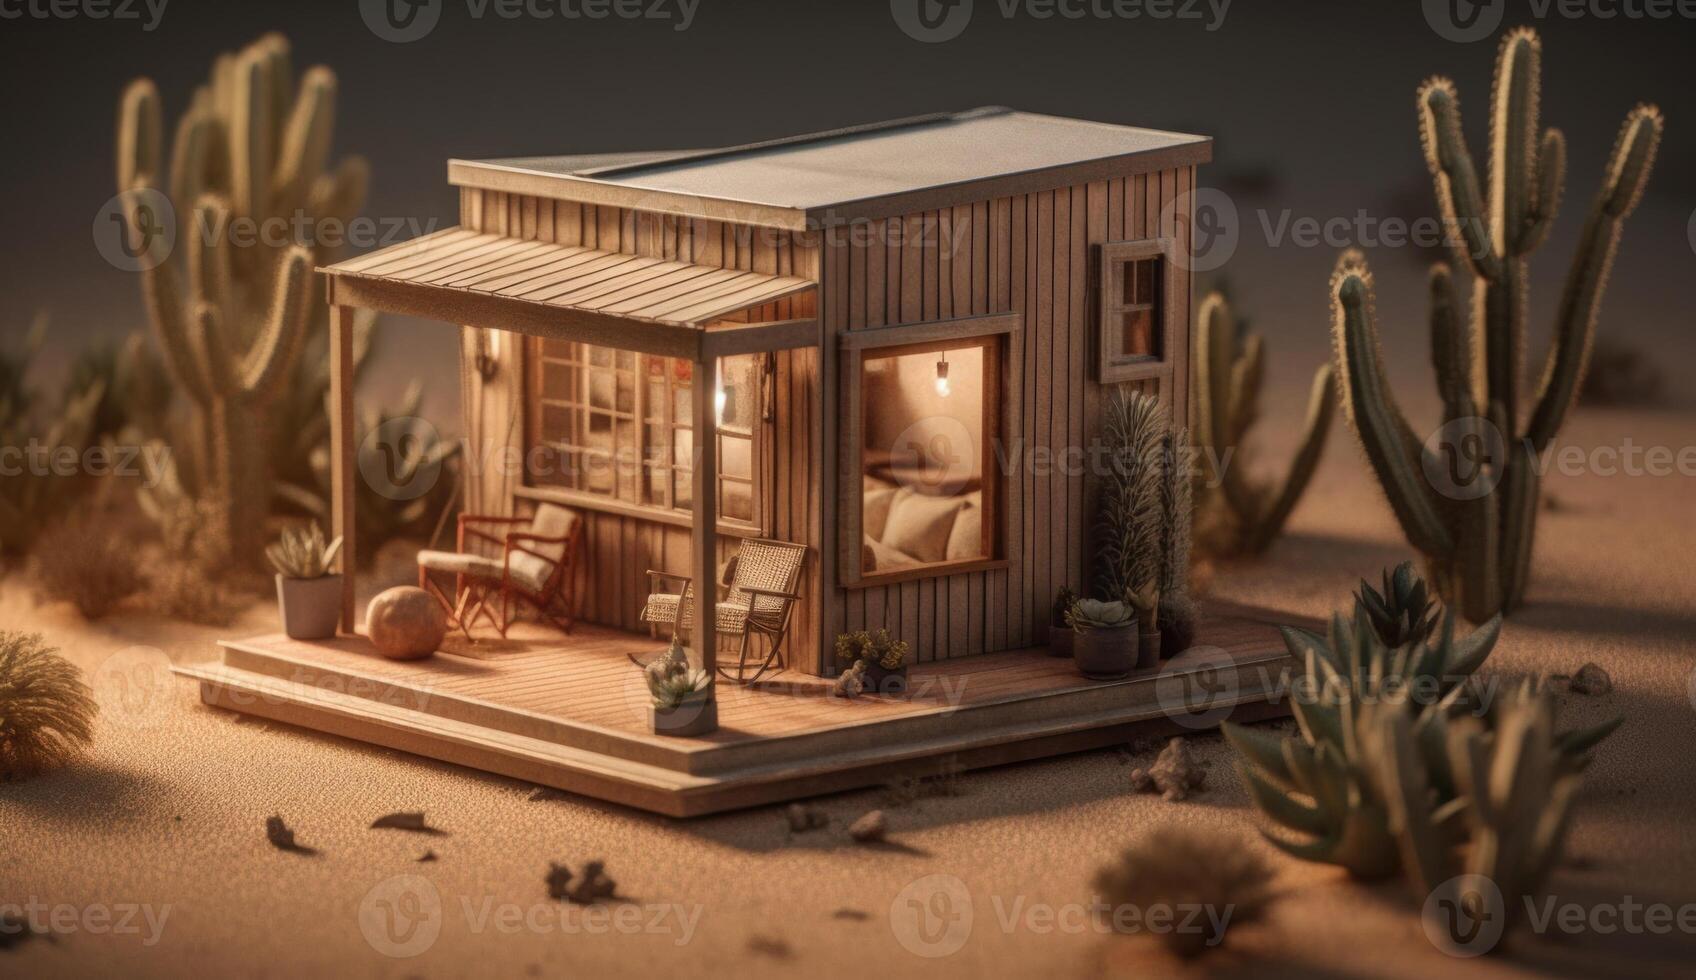 Photorealistic Fantasy House in the Desert, Equipped with Solar Panels for Sustainable Energy Solutions. photo